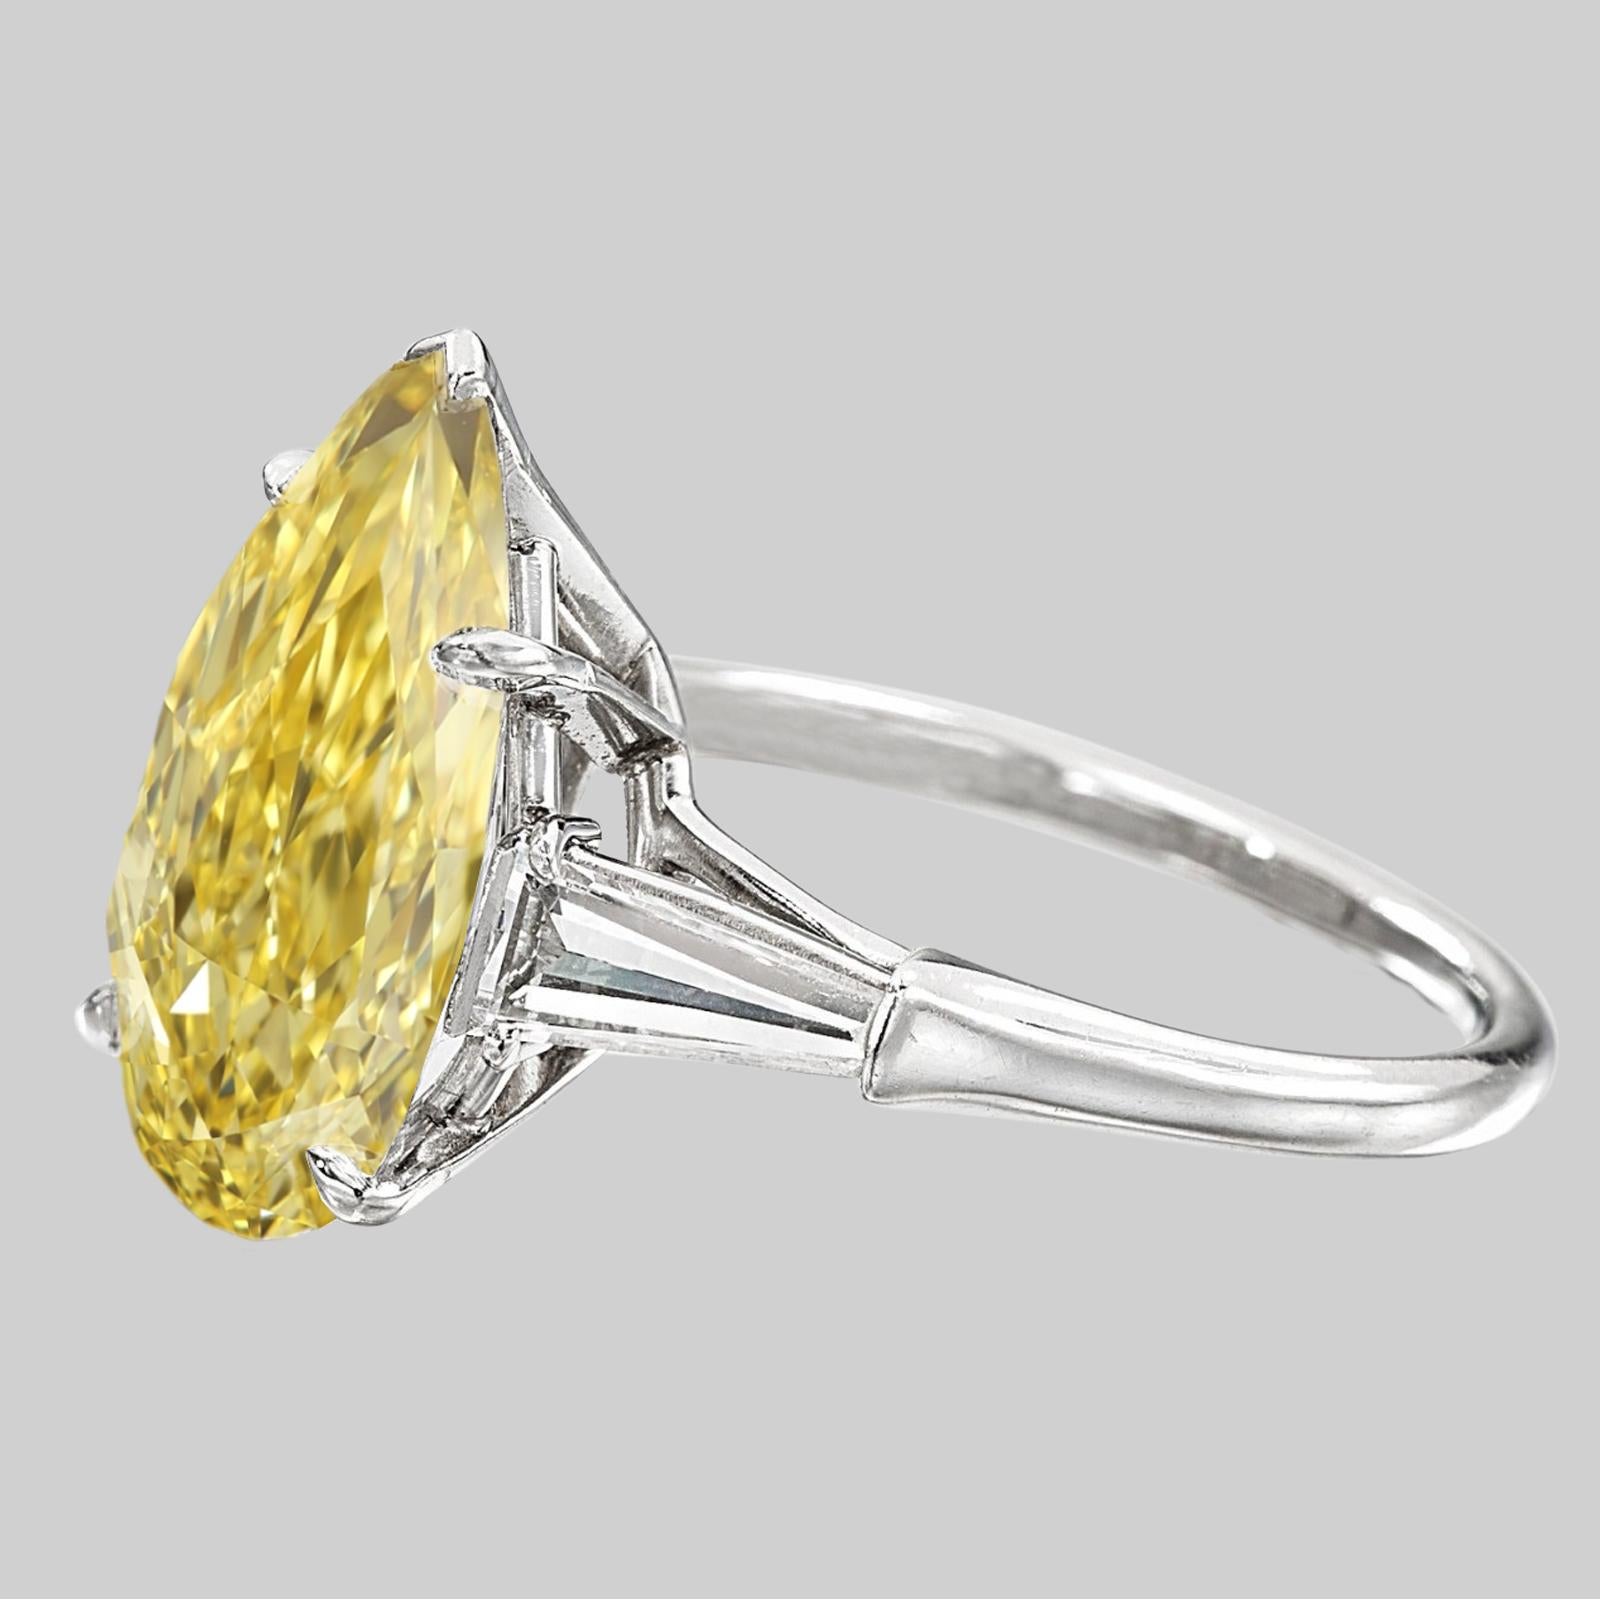 Contemporary GIA Certified 5.09 Carat Fancy Yellow Diamond Ring For Sale